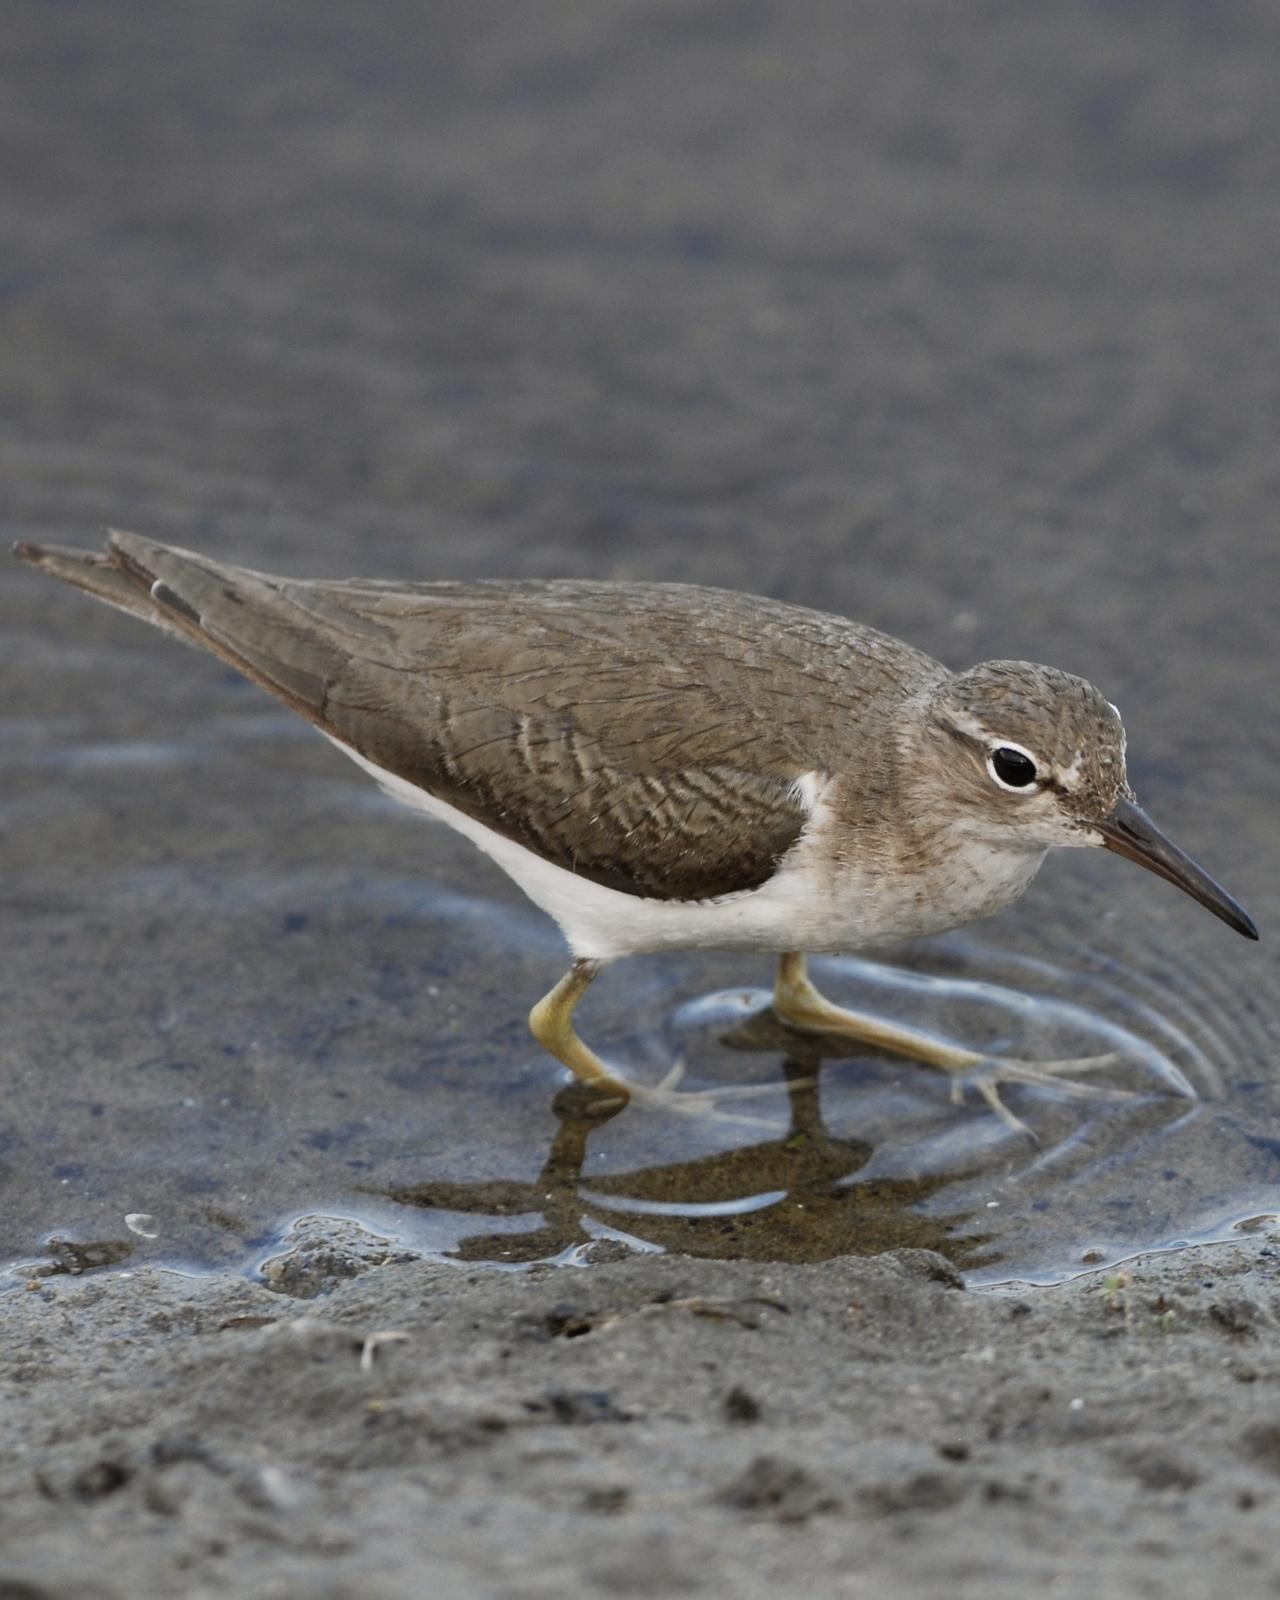 Spotted Sandpiper Photo by David Hollie